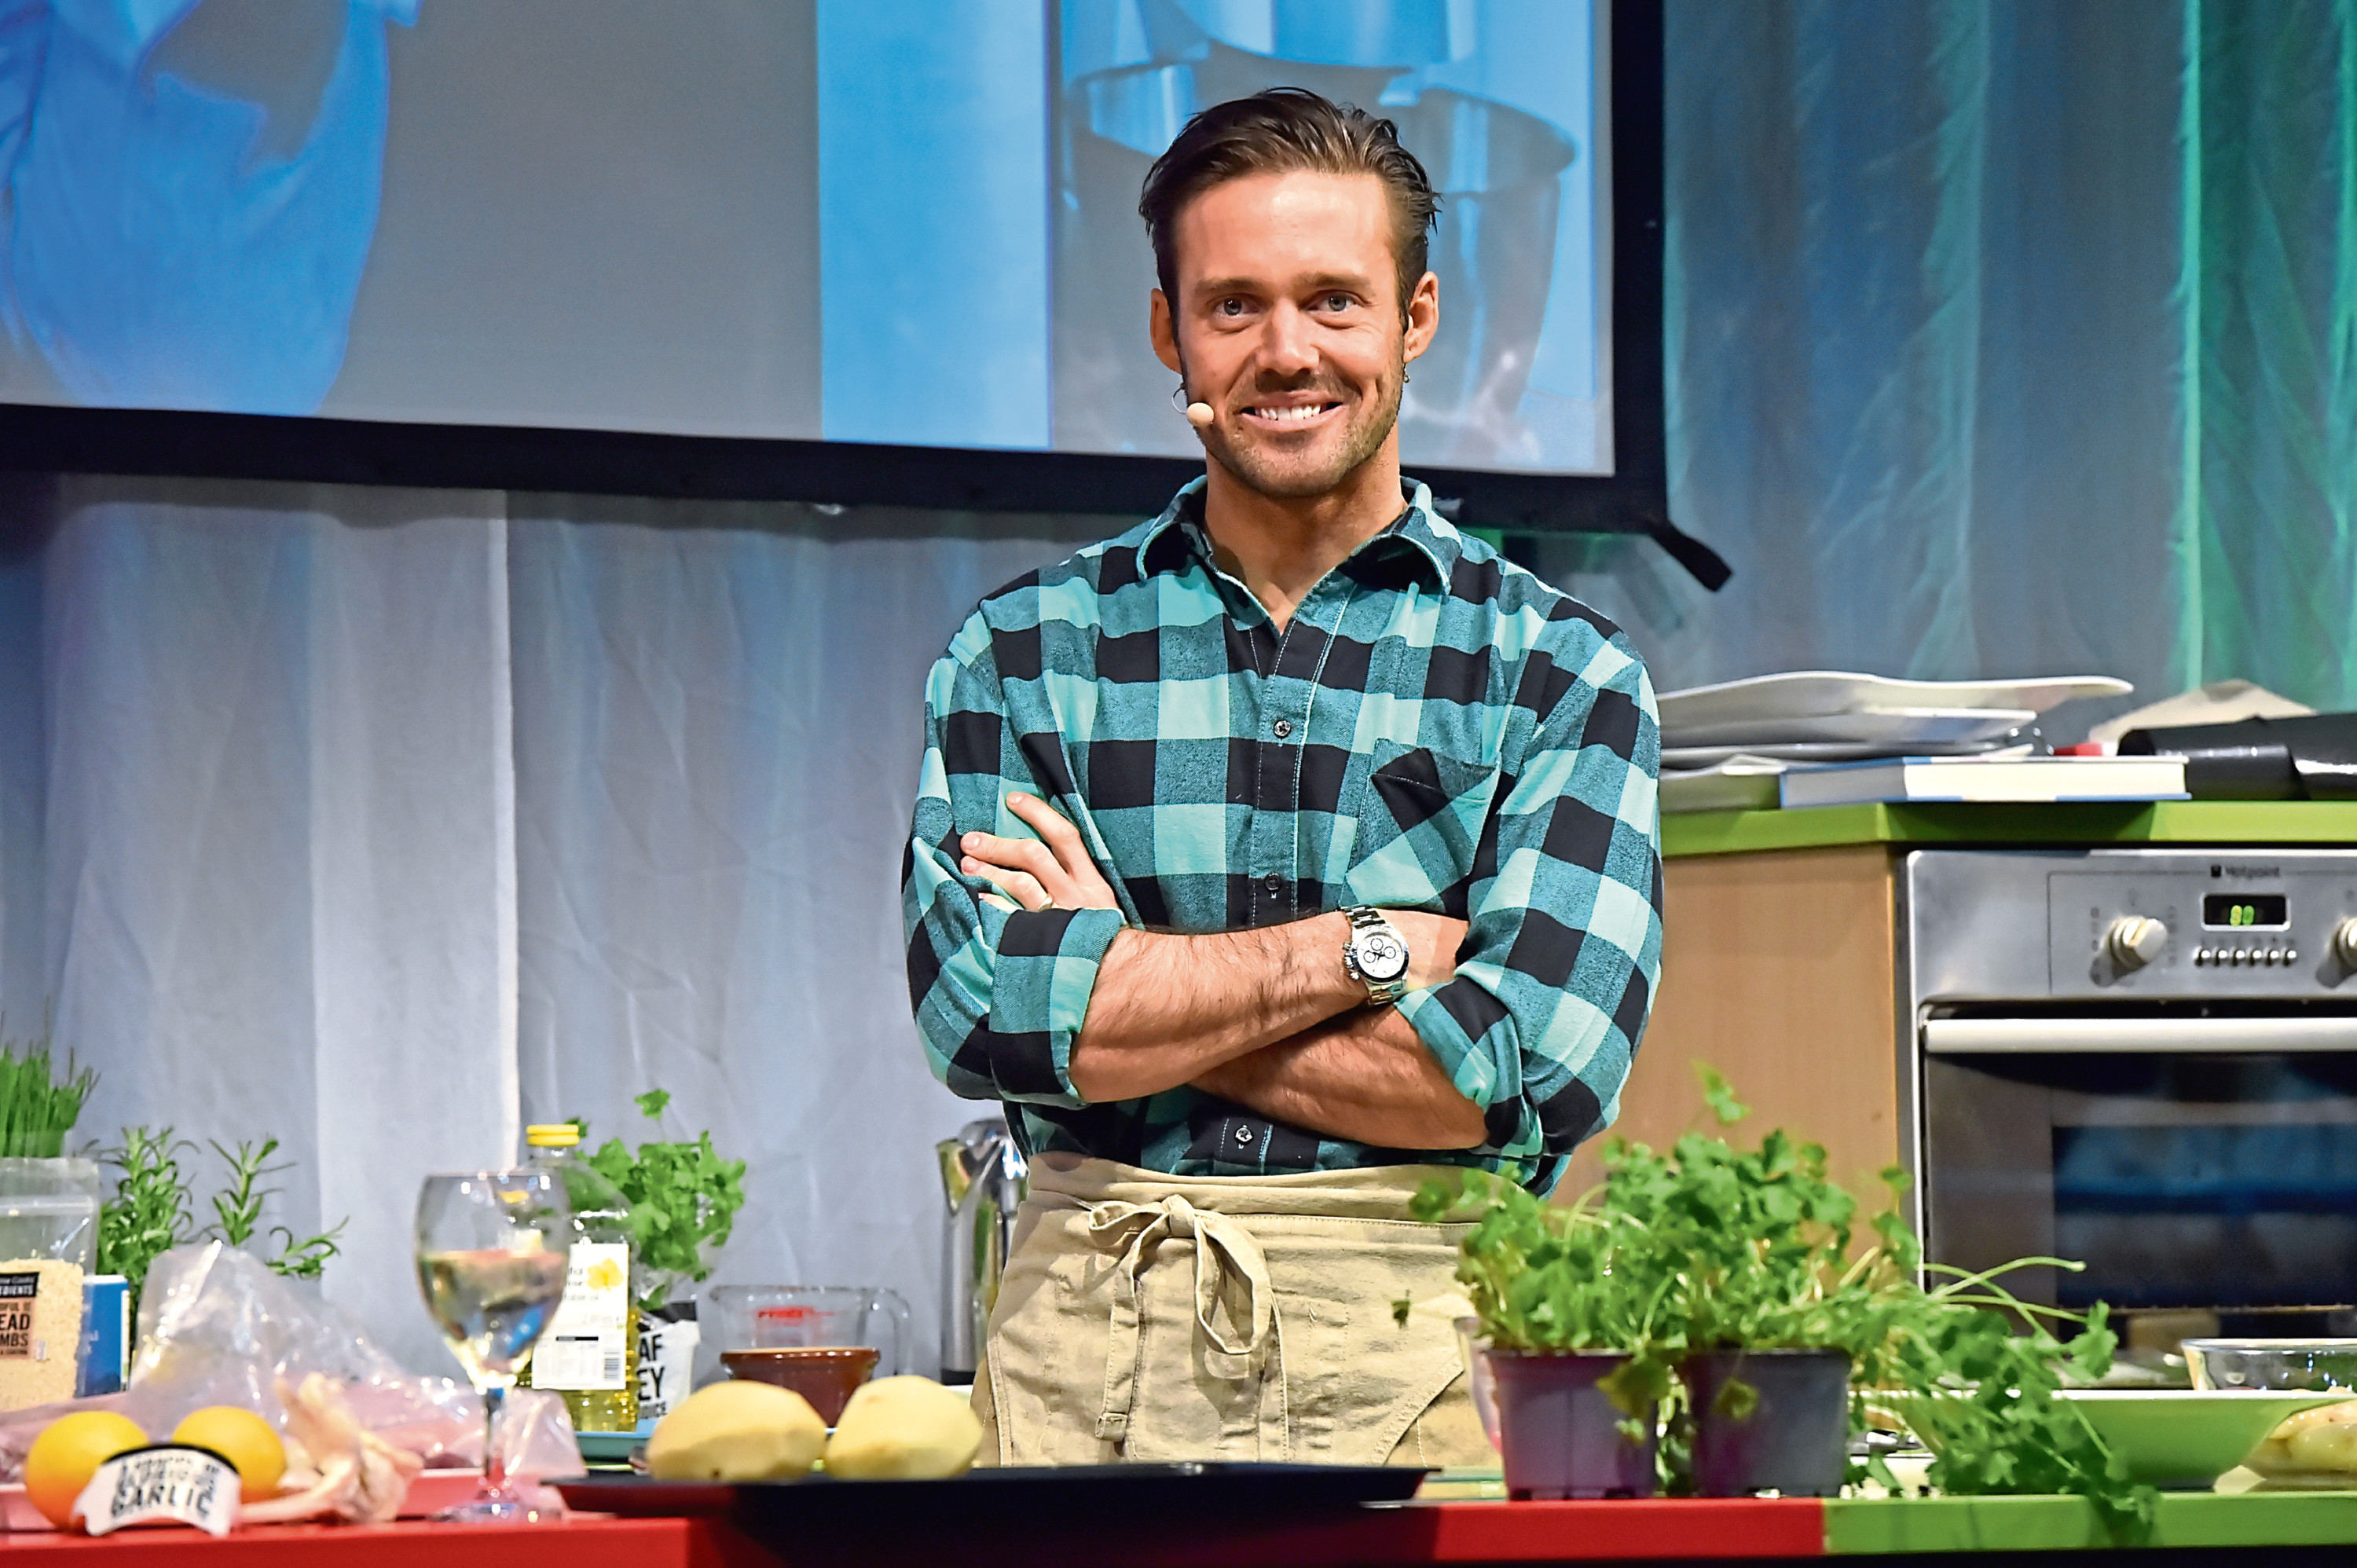 Taste of Grampian 2019 at the Thainstone Centre, Inverurie.
Picture of Spencer Matthews (pictured) and John Torode demonstration

Picture by KENNY ELRICK     01/06/2019